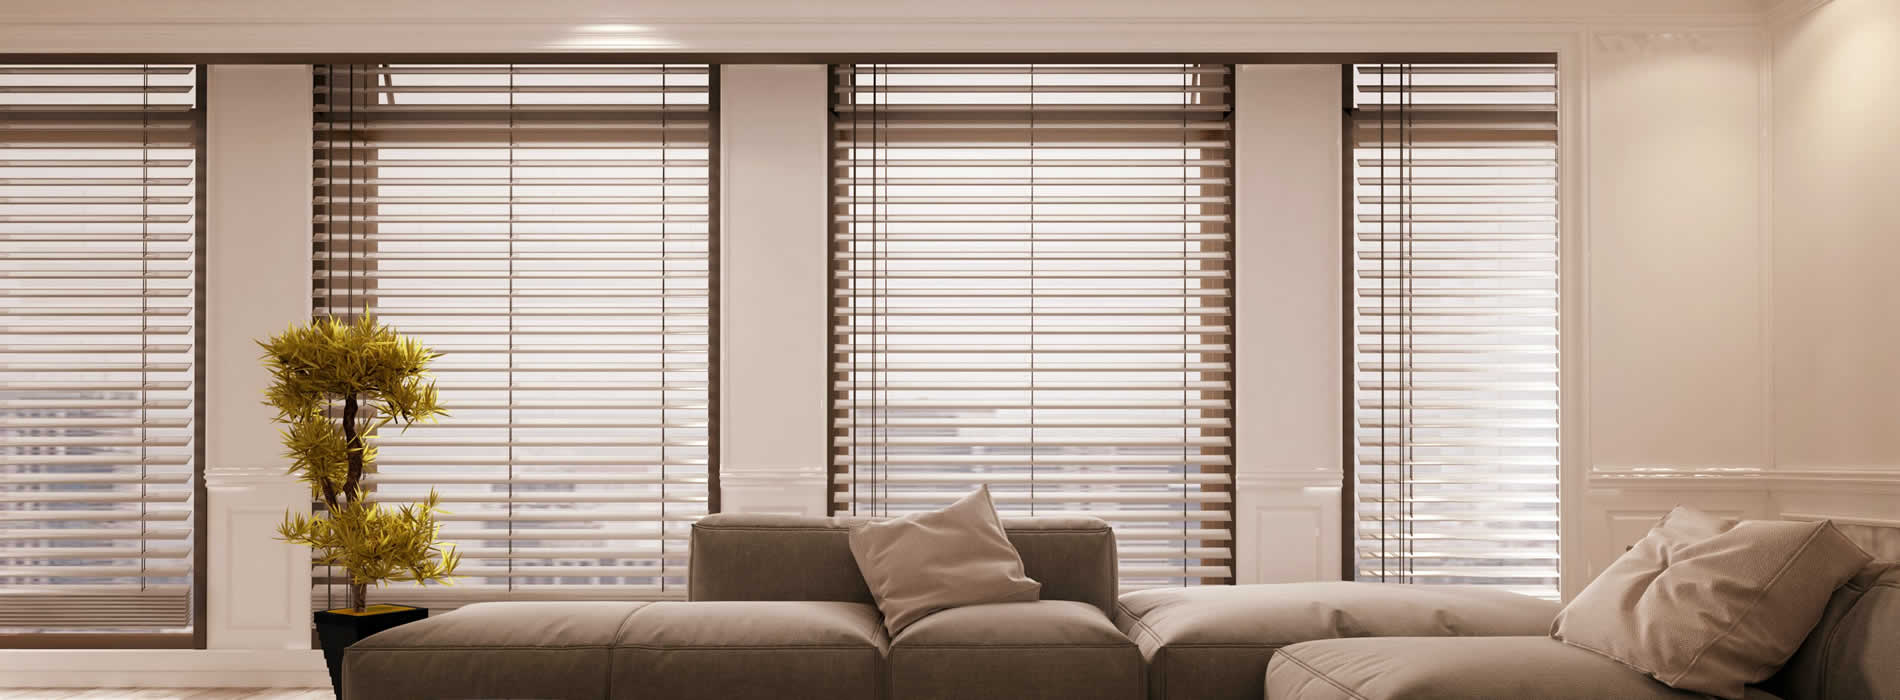 Window treatments allow you to control privacy, light flow, style, and so much more!